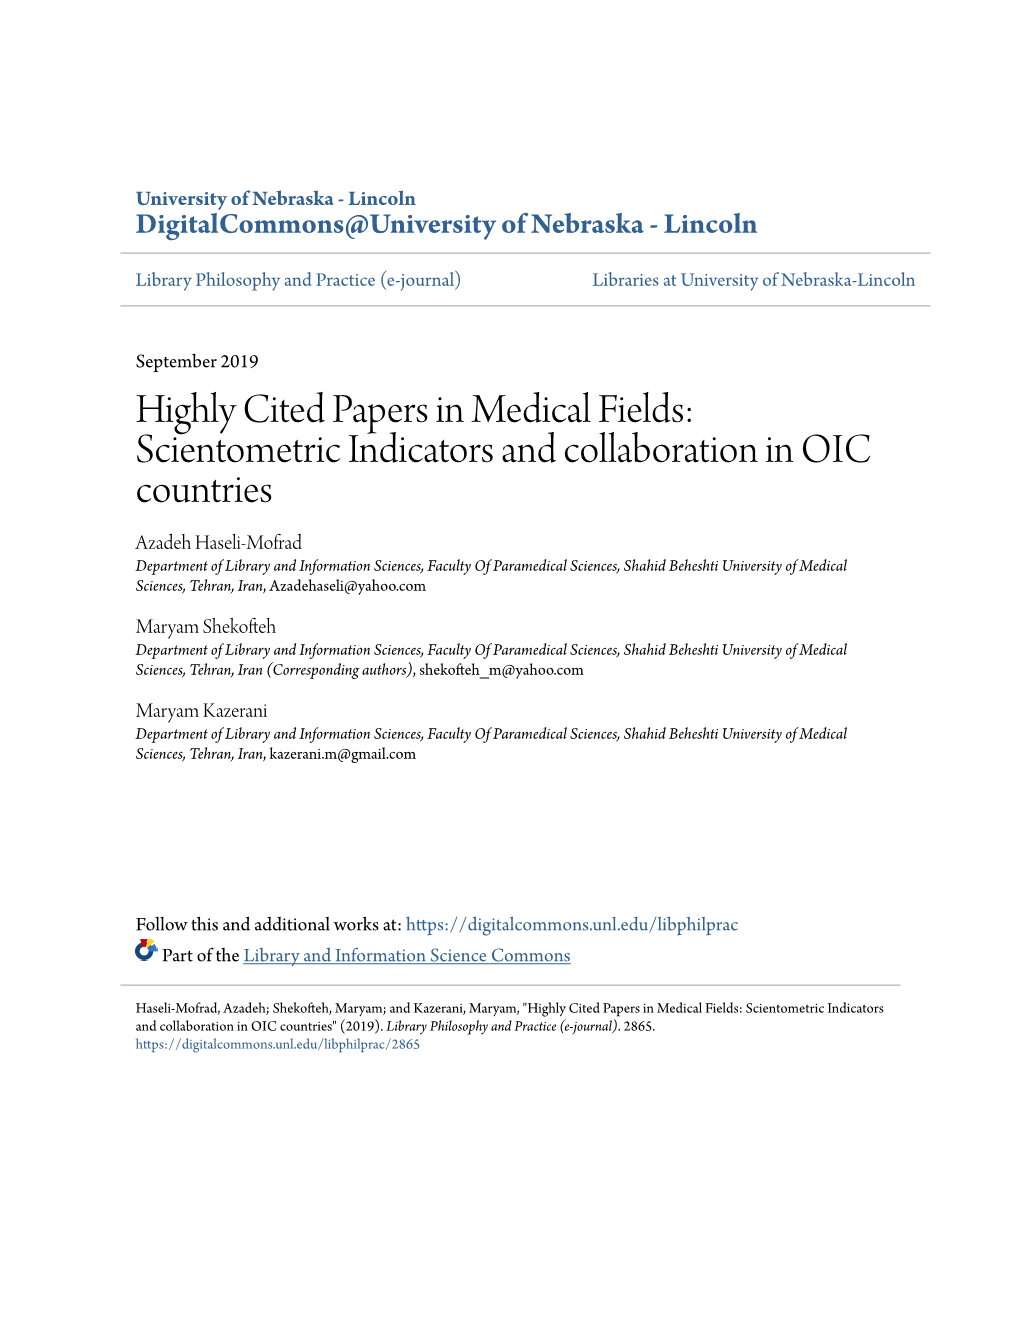 Highly Cited Papers in Medical Fields: Scientometric Indicators and Collaboration in OIC Countries